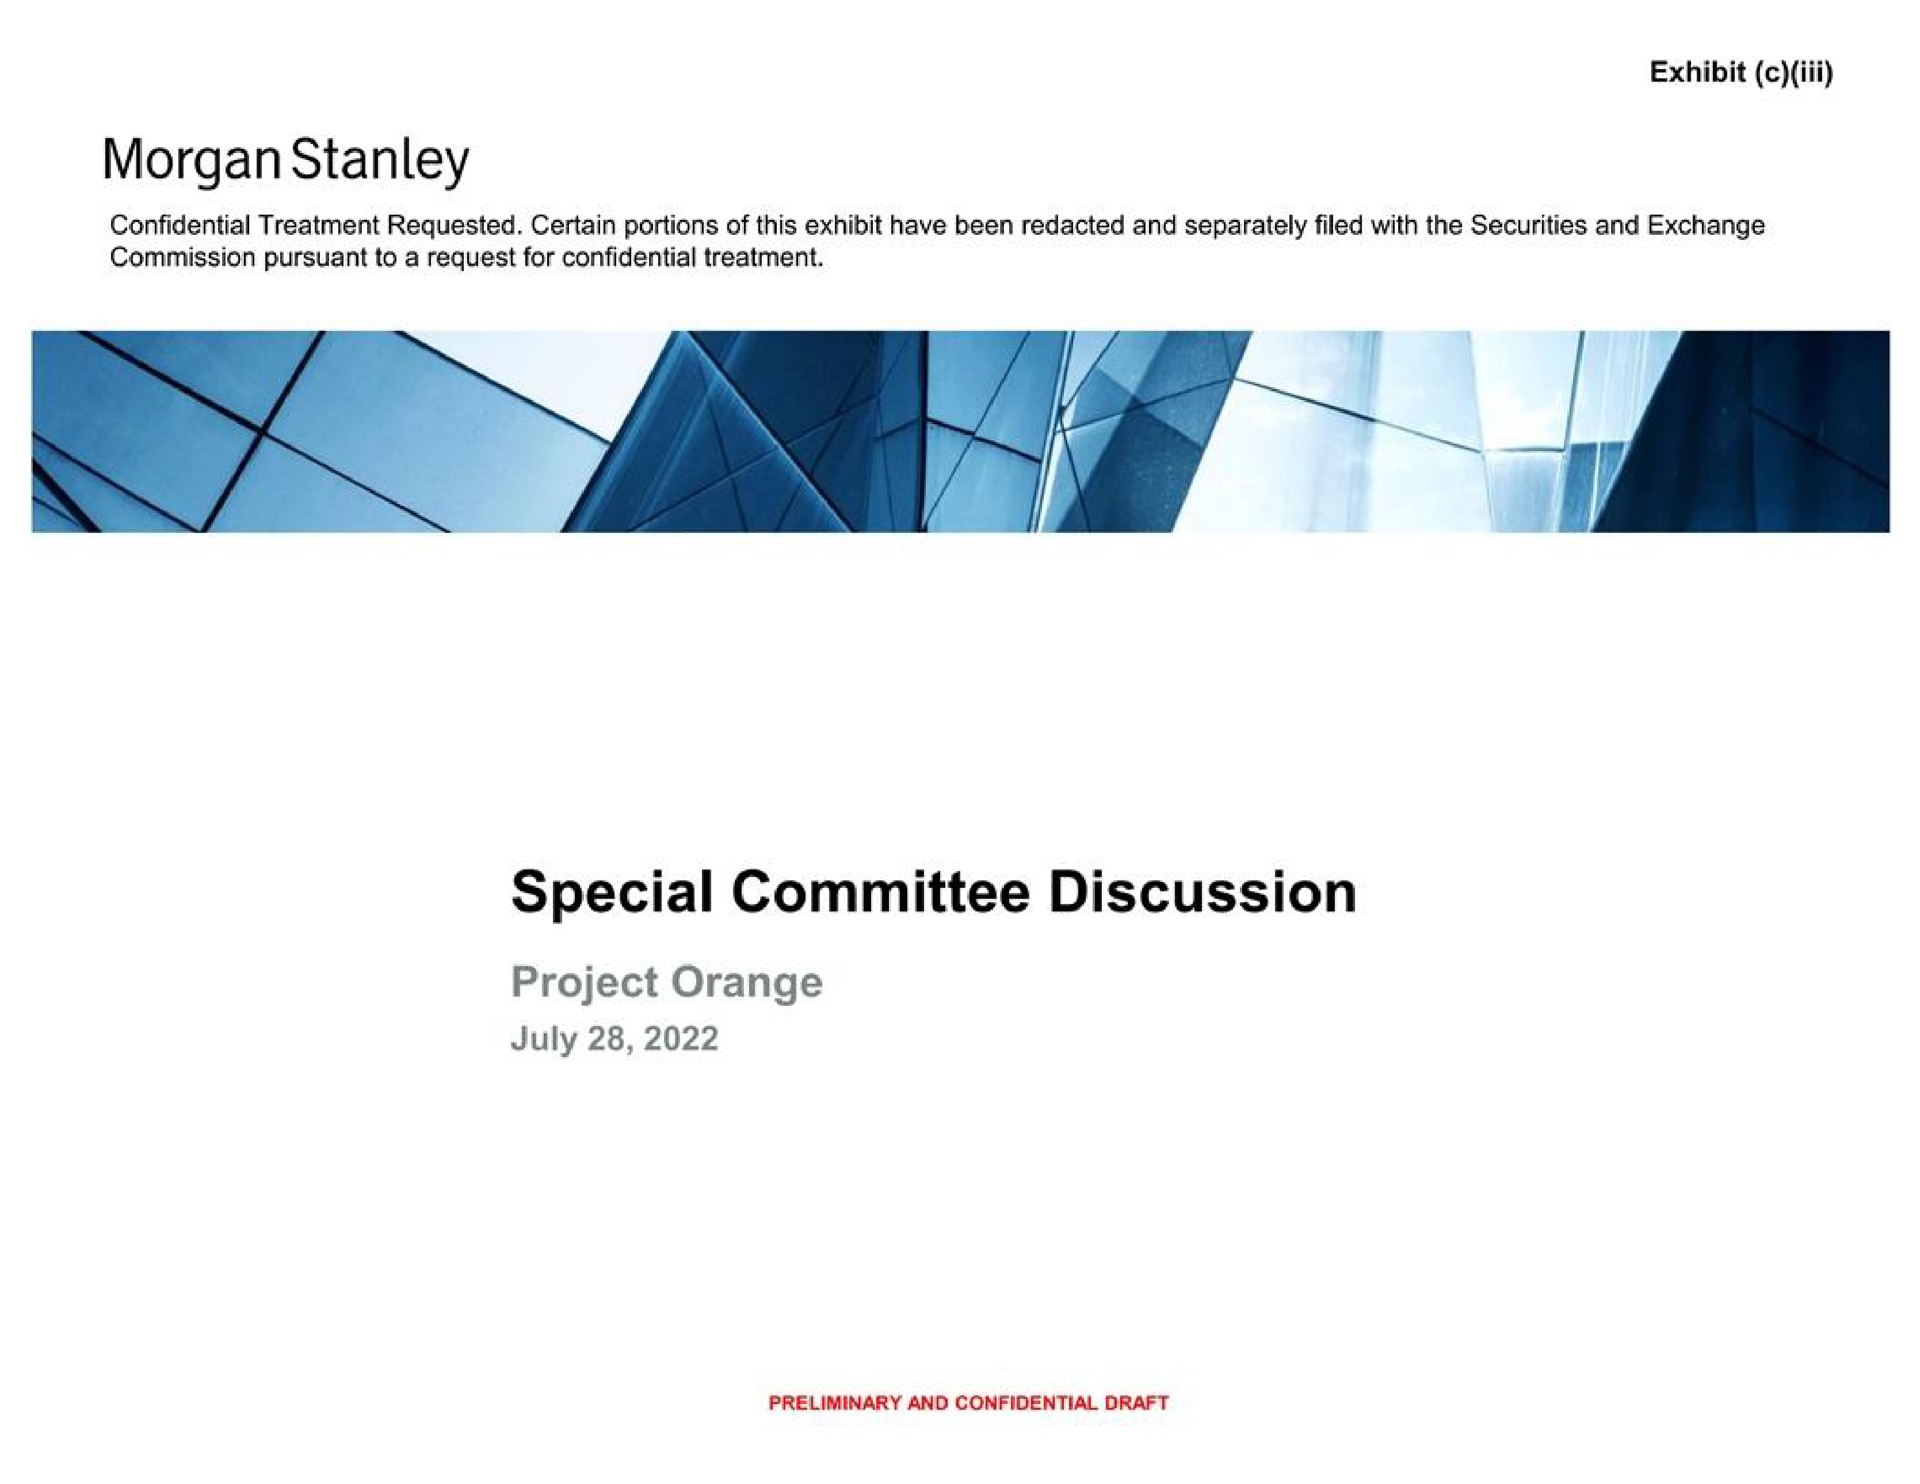 morgan special committee discussion | Morgan Stanley